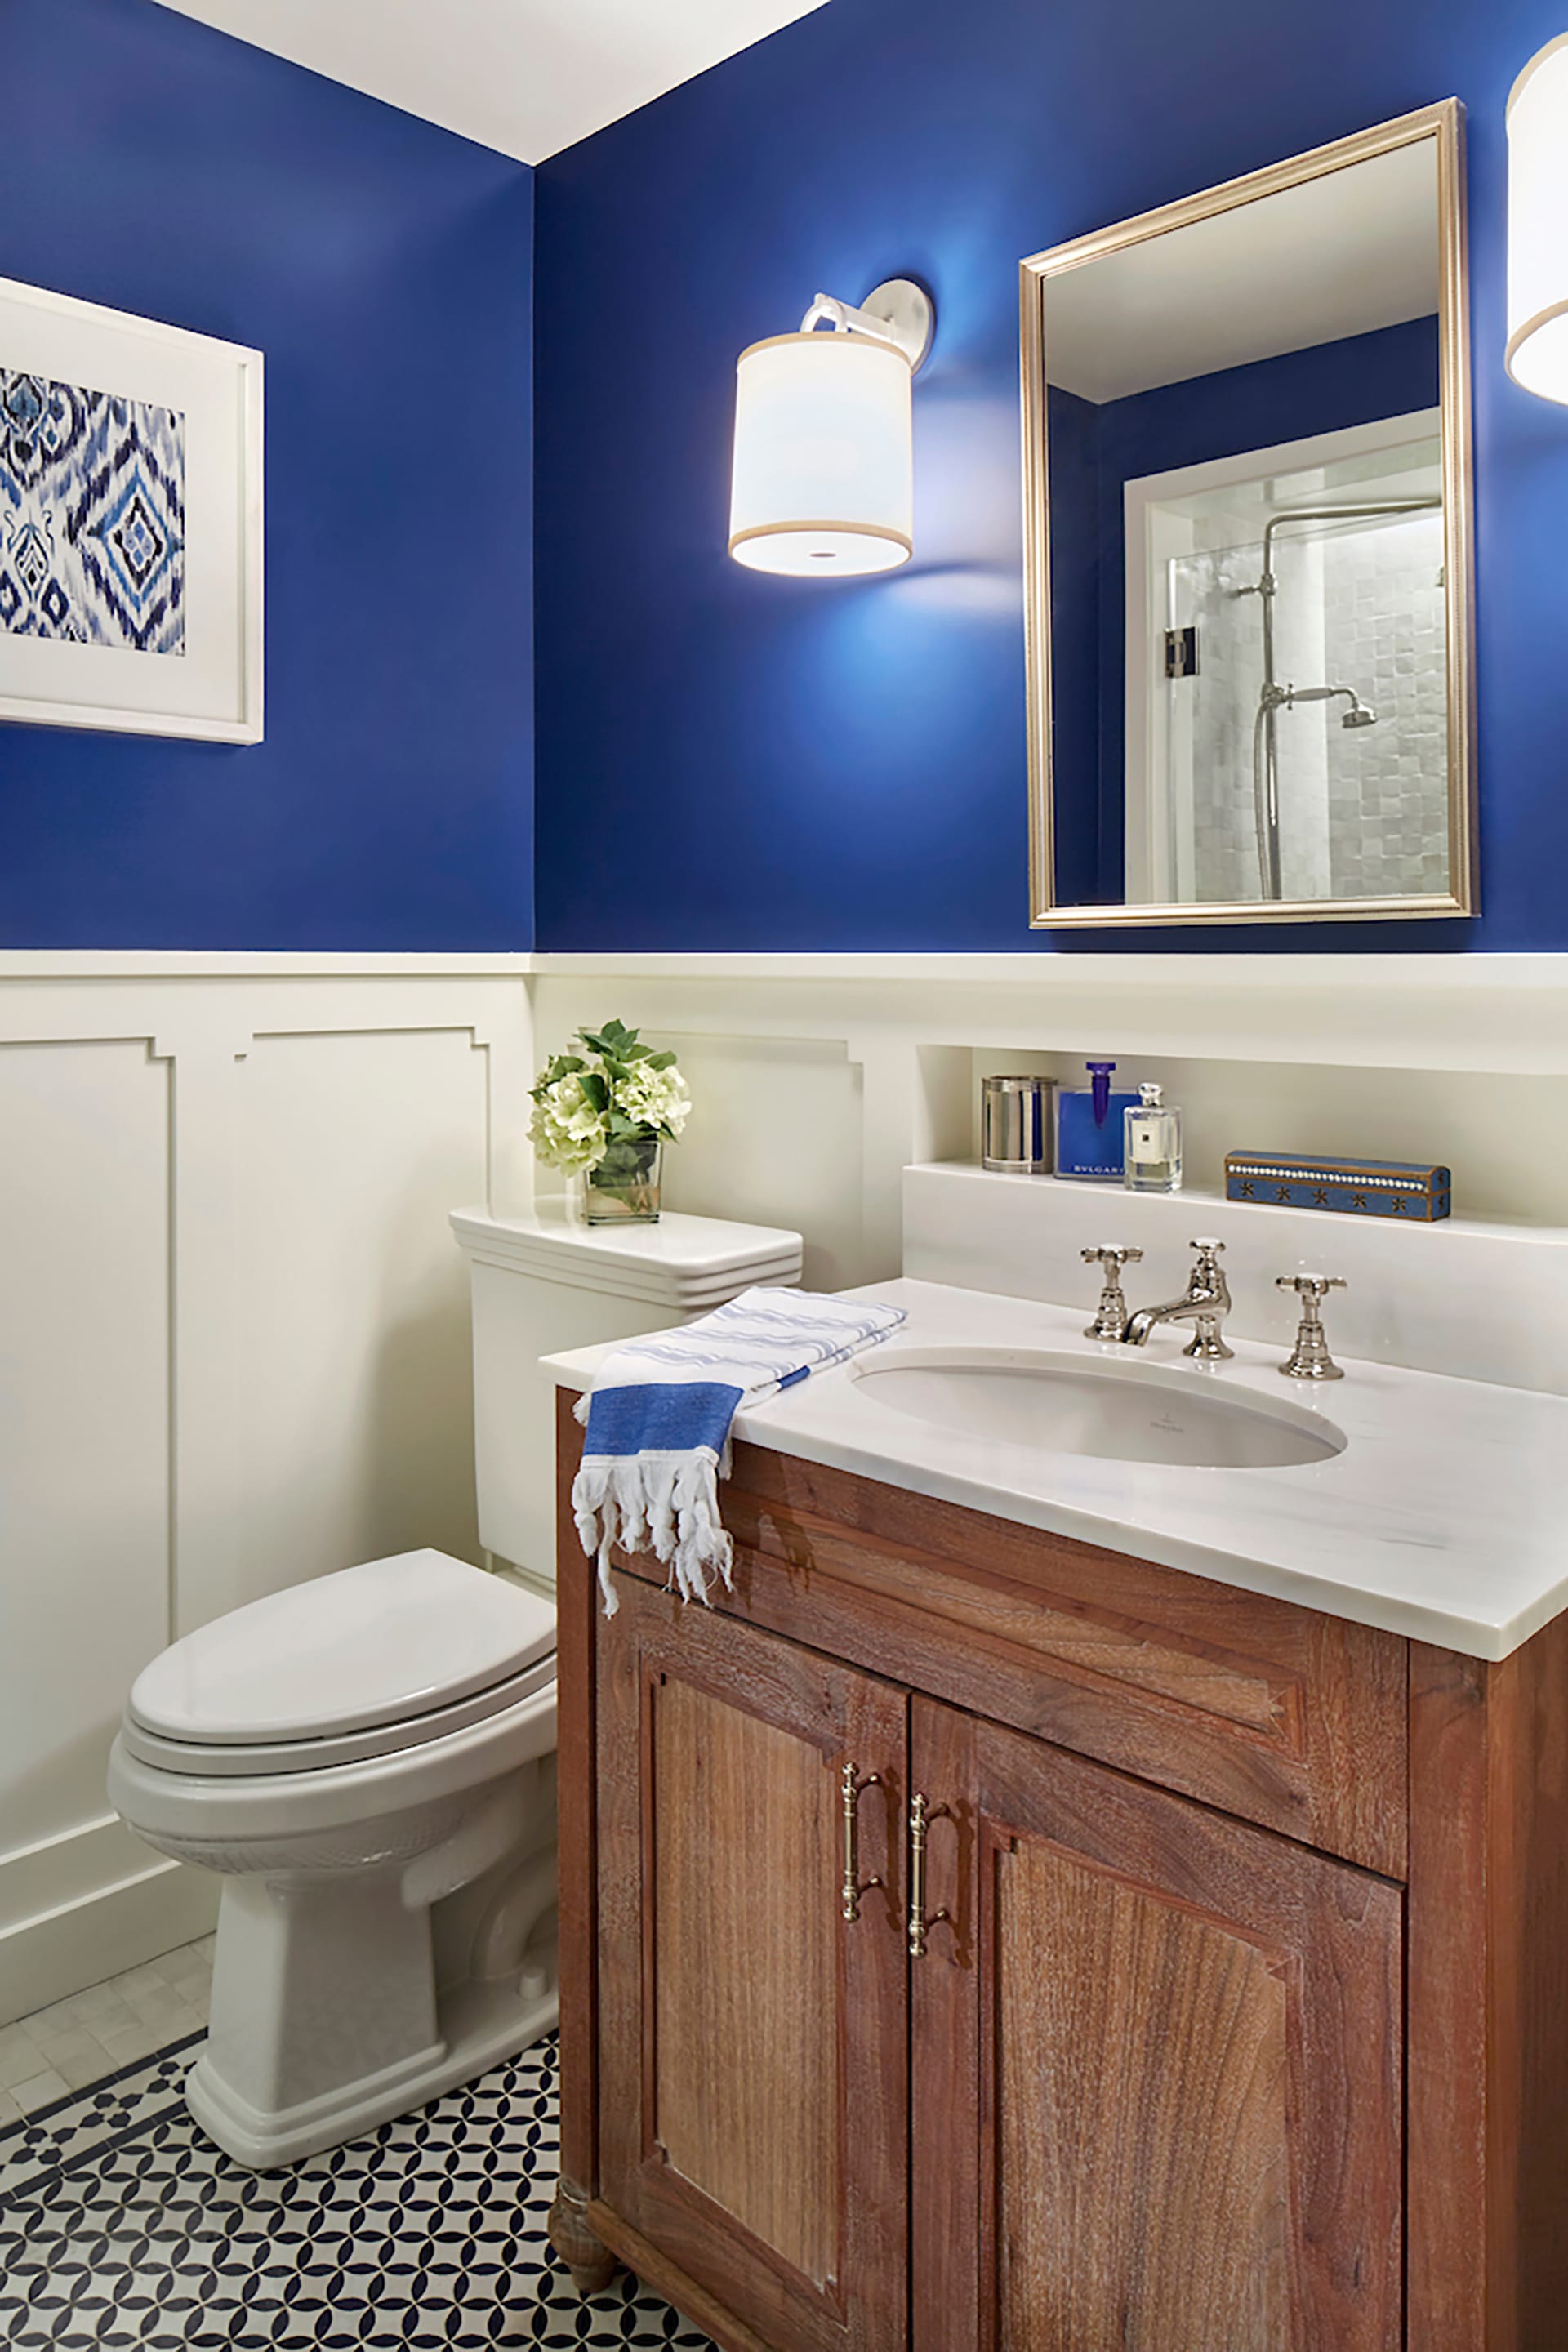 Guest bathroom with polished nickel fixtures, royal blue paint on the top half, and white paneling on the bottom half of the walls.